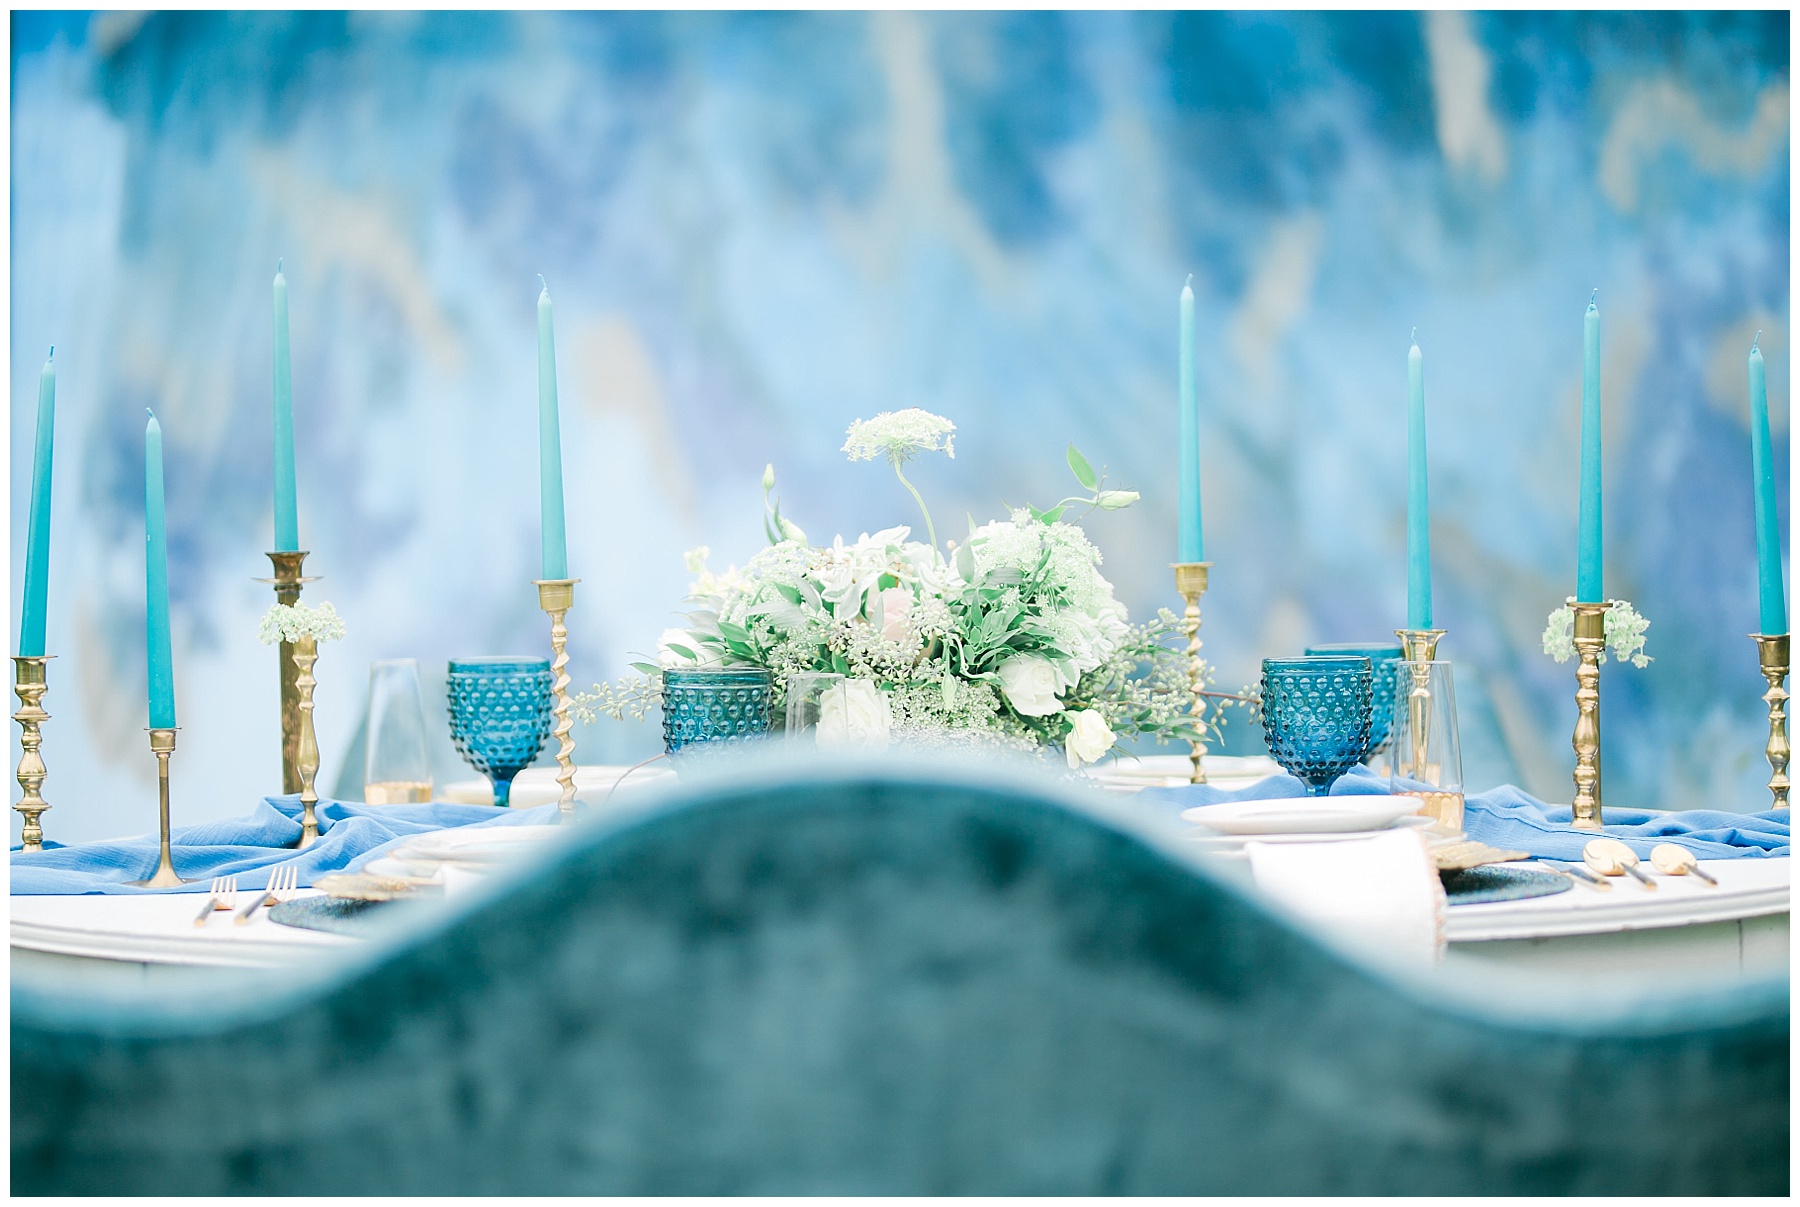 shades of blue wedding, misty saves the day, erika mills photography, mad hatter vintage rentals, katherine hallberg design, ceindy doodles, blush tones, flawless on site, studio i do bridals, the hanging gardens virginia beach